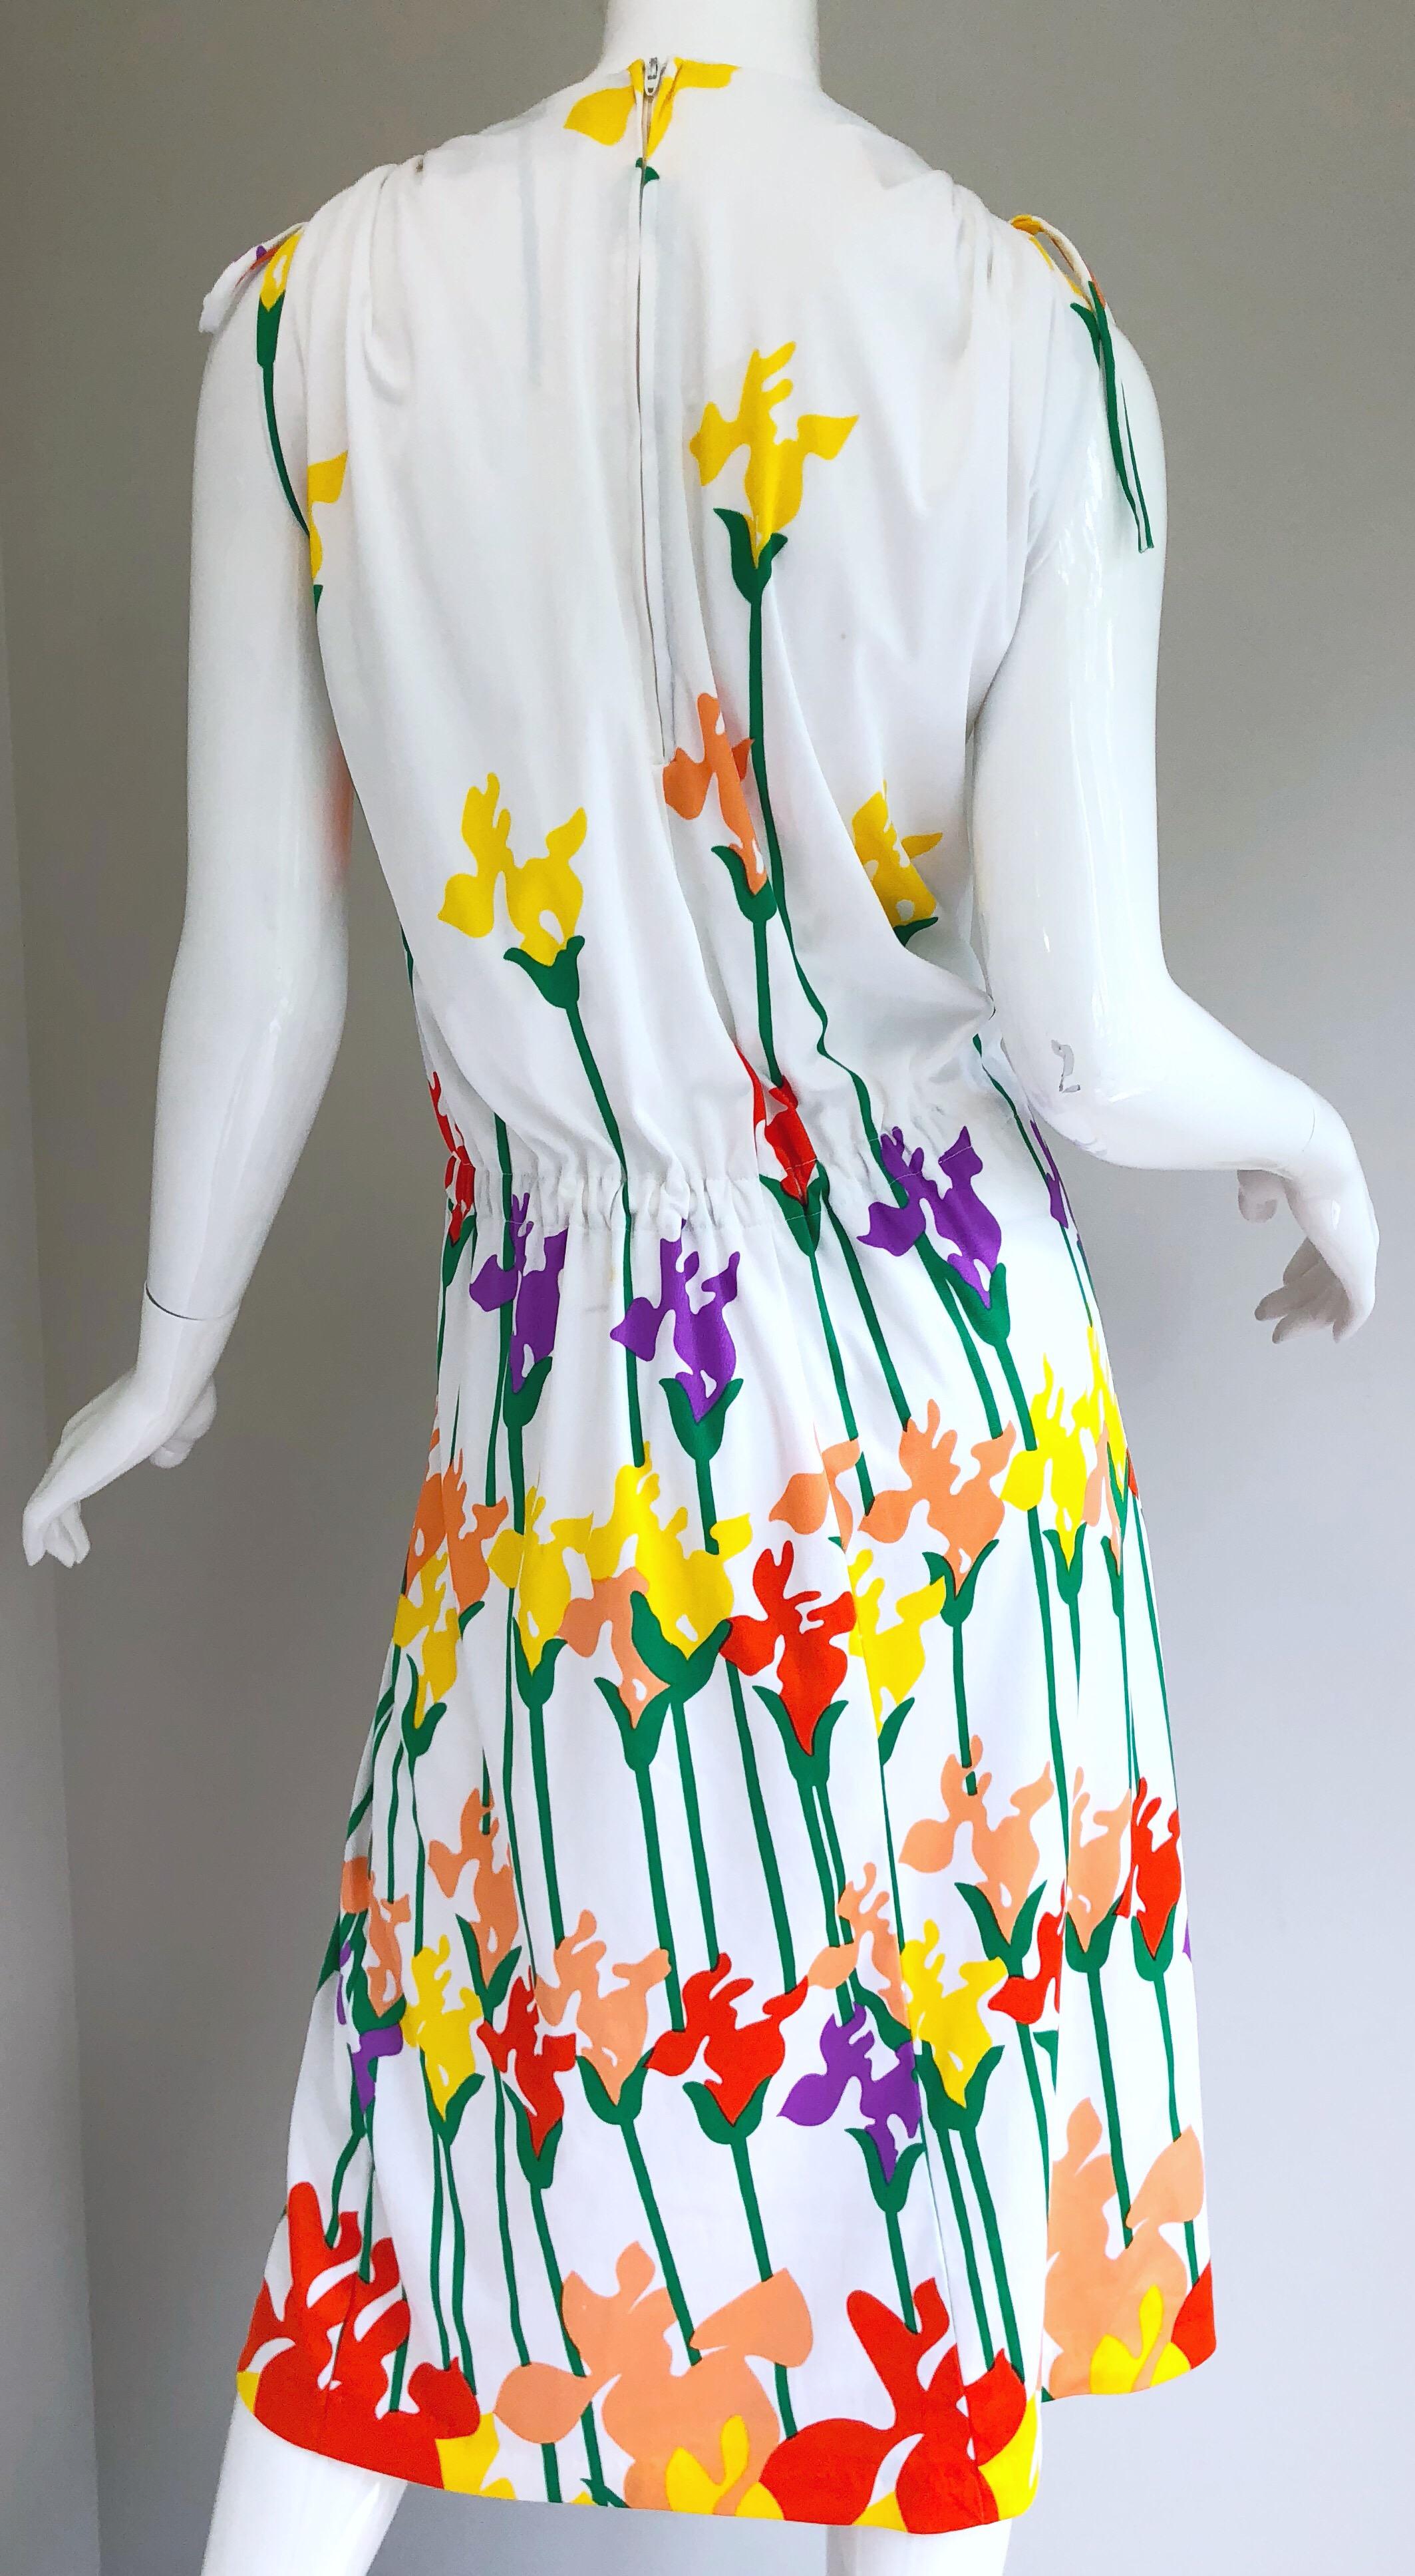 Lanvin Vintage 1970s Tulip Butterfly Print Colorful 70s Jersey Drawstring Dress For Sale 8